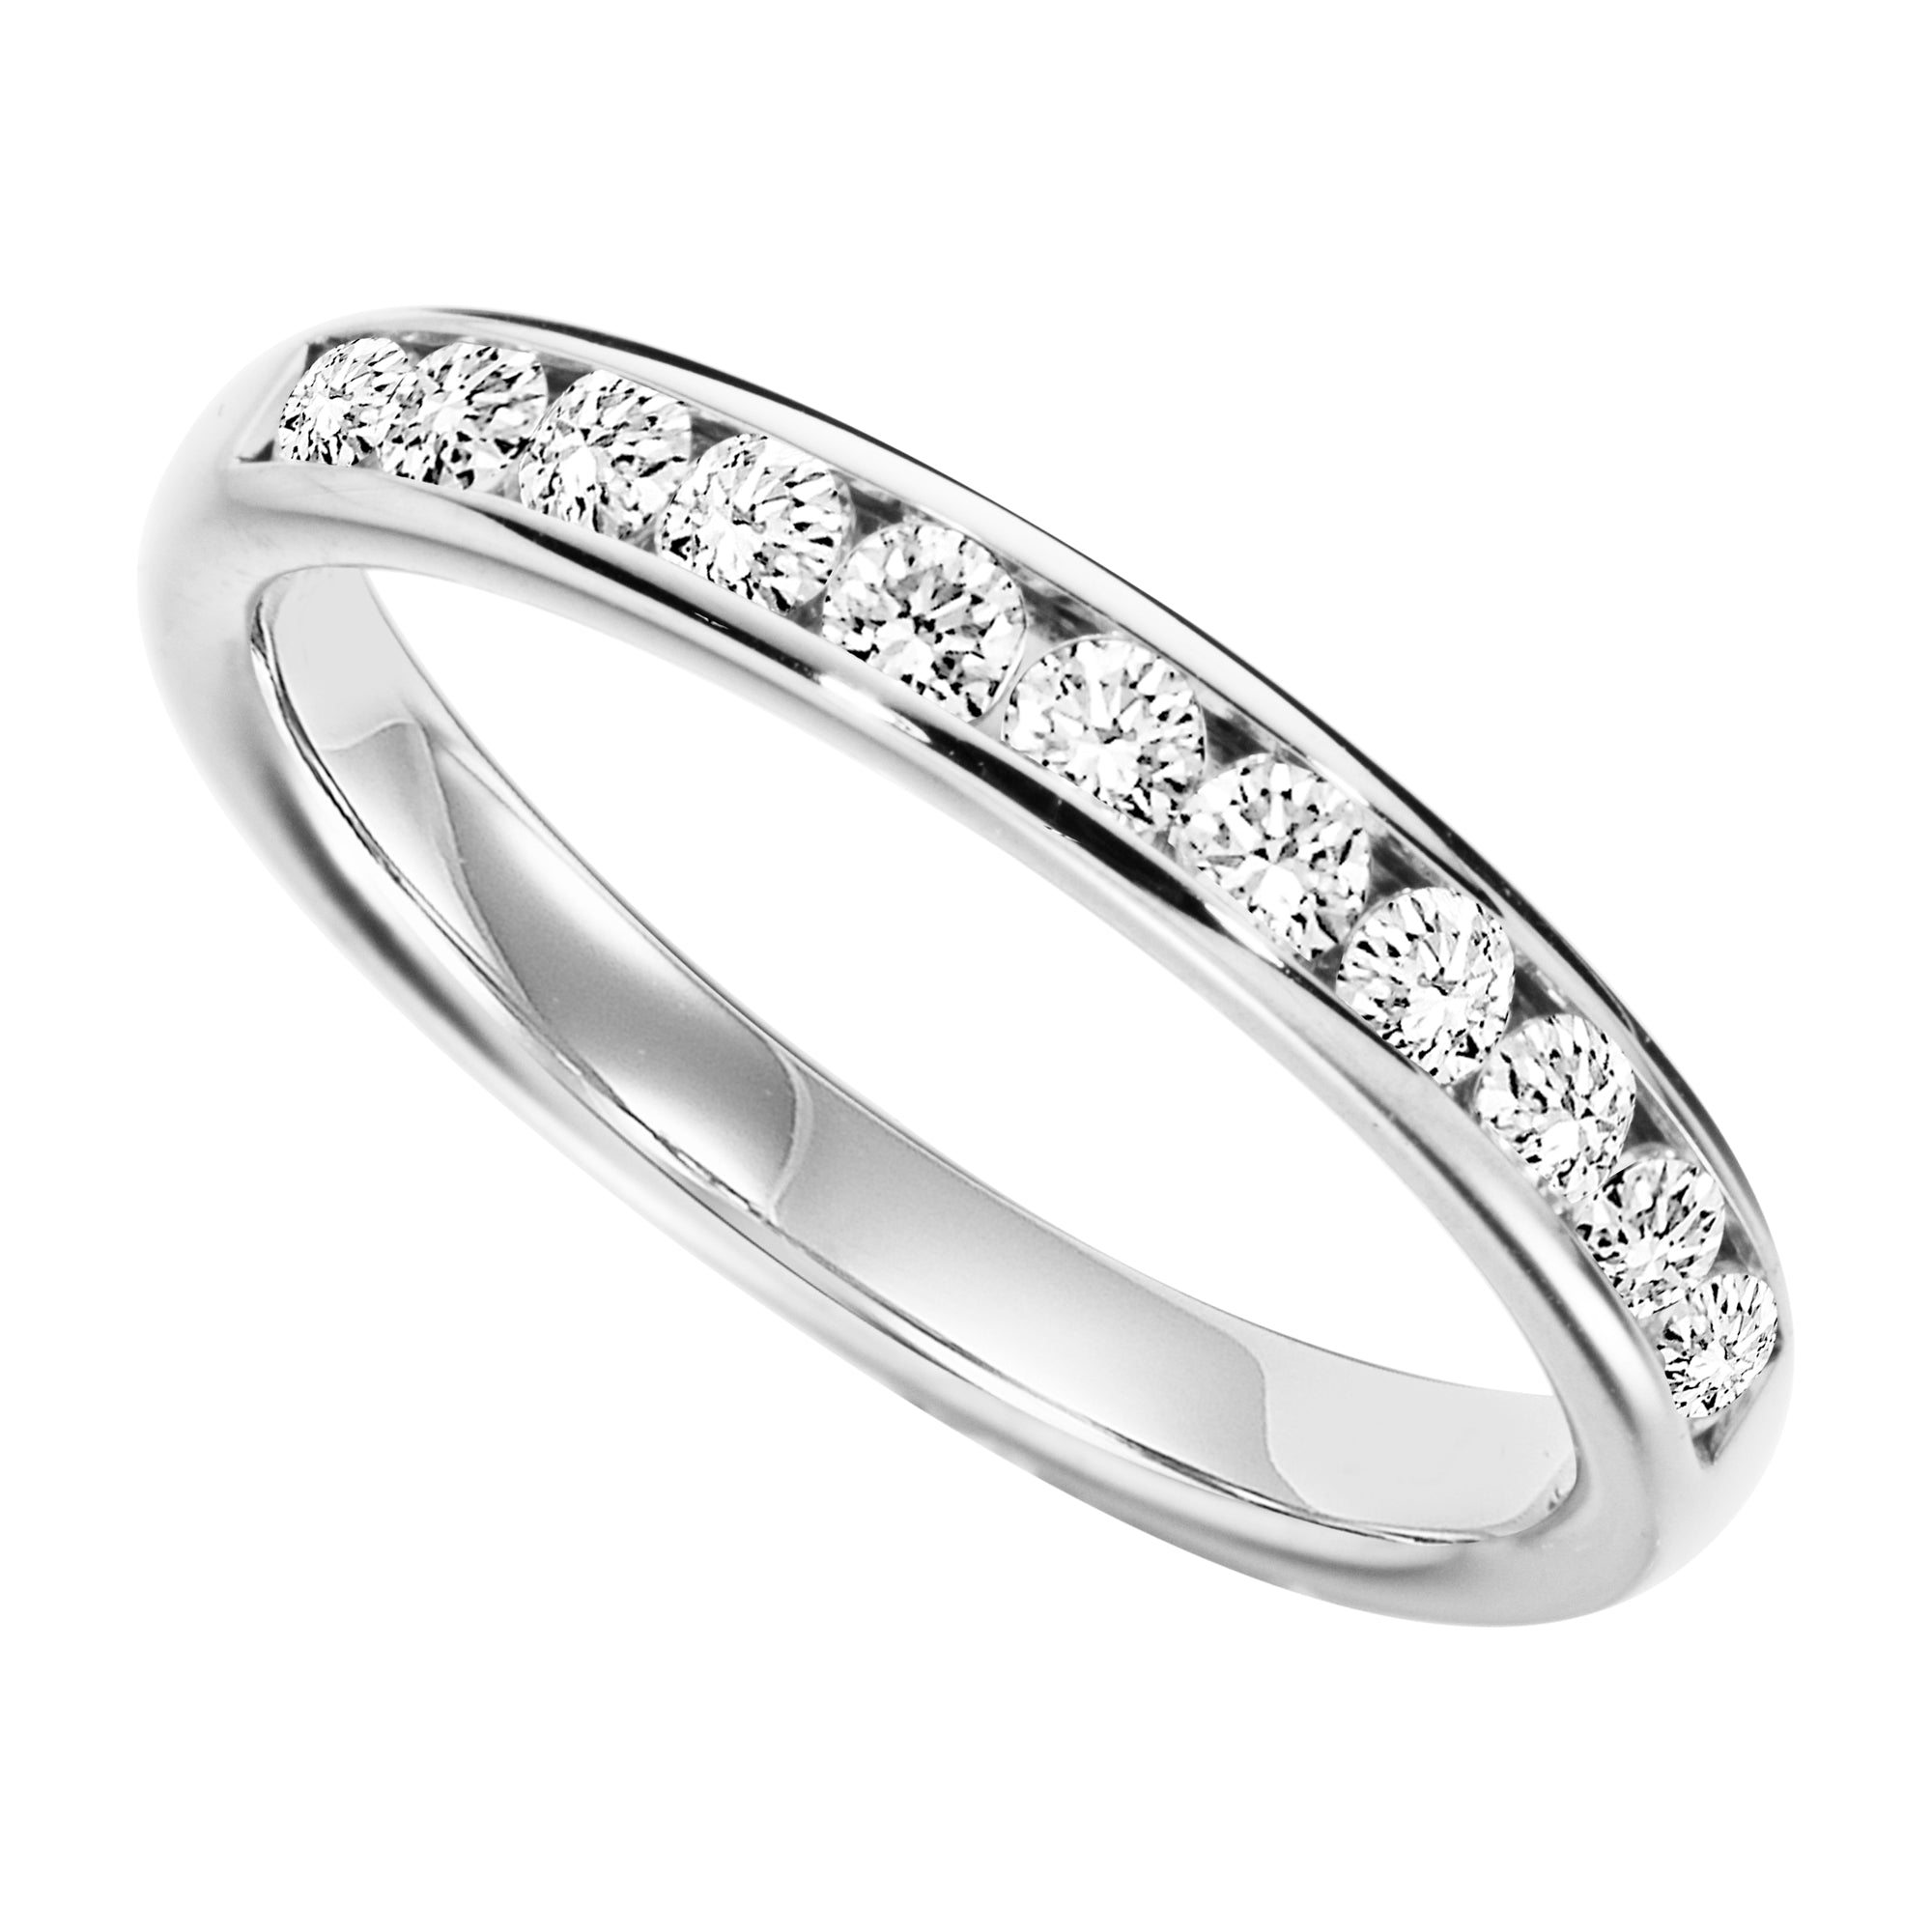 Sterling Silver Cubic Zirconia Ring - AK1013 - Hallmark Jewellers Formby & The Jewellers Bench Widnes